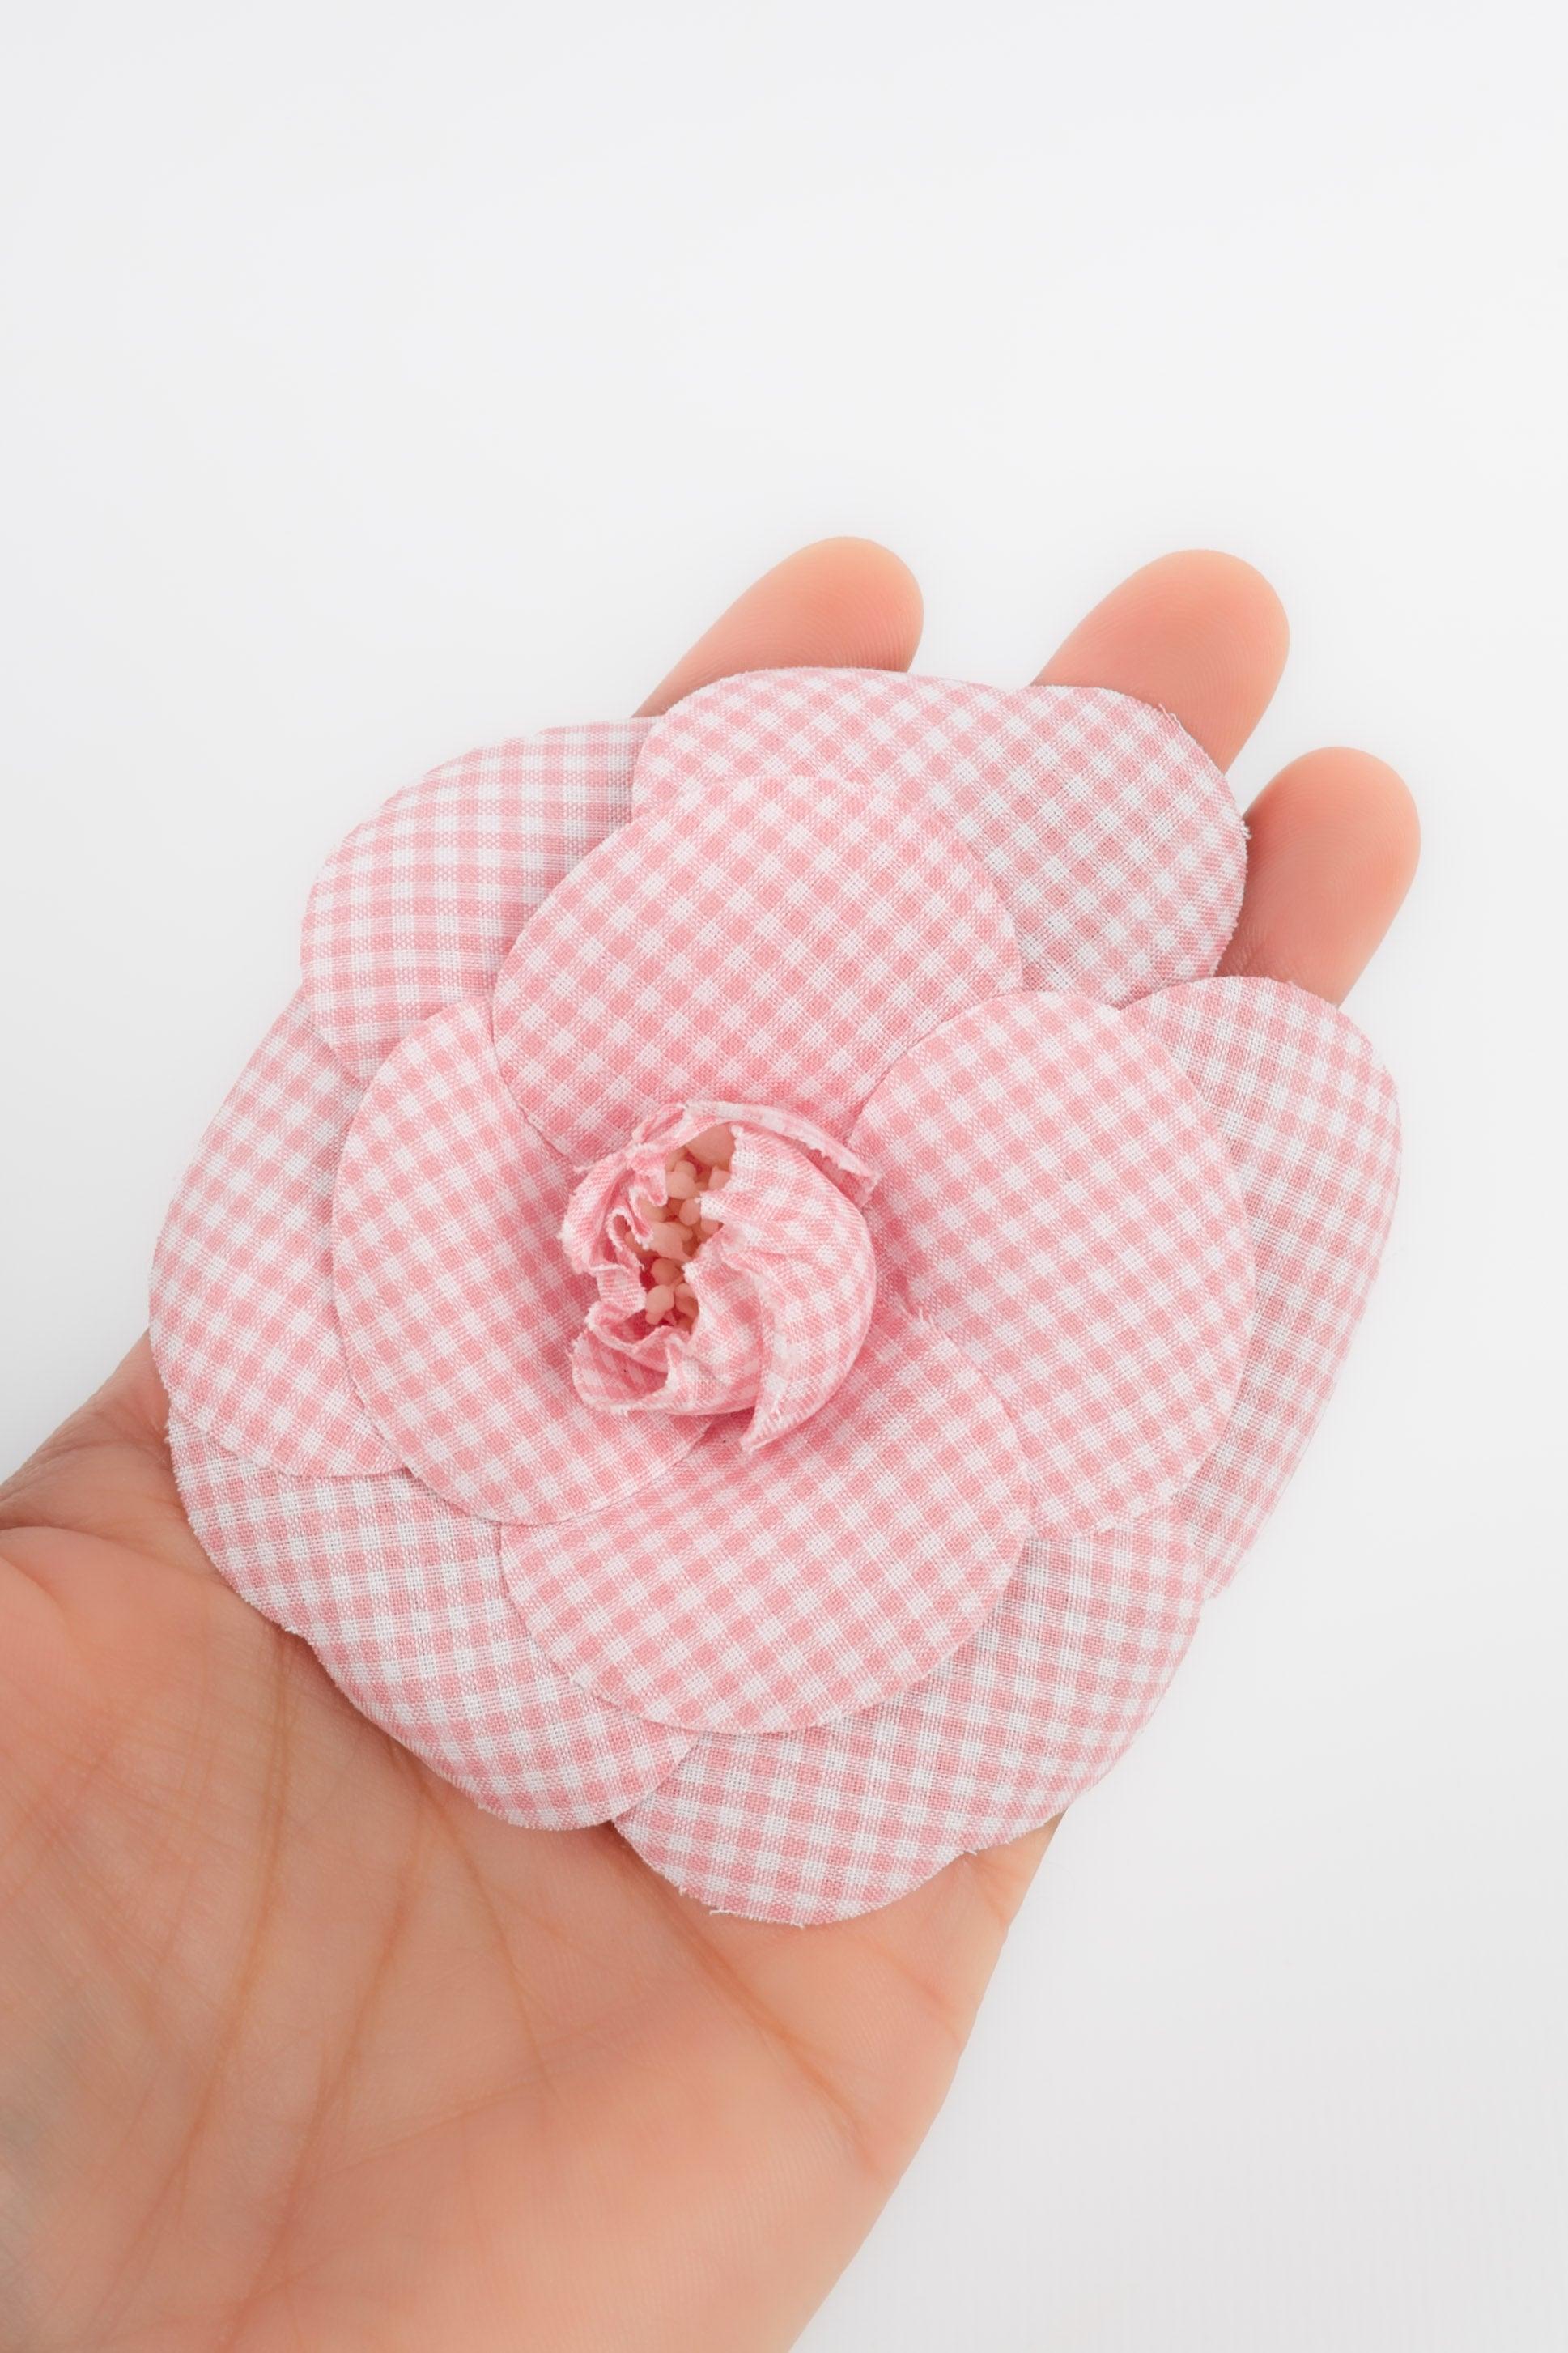 Chanel Camellia Brooch Made of Pink and White Gingham Fabric, 1990s For Sale 2